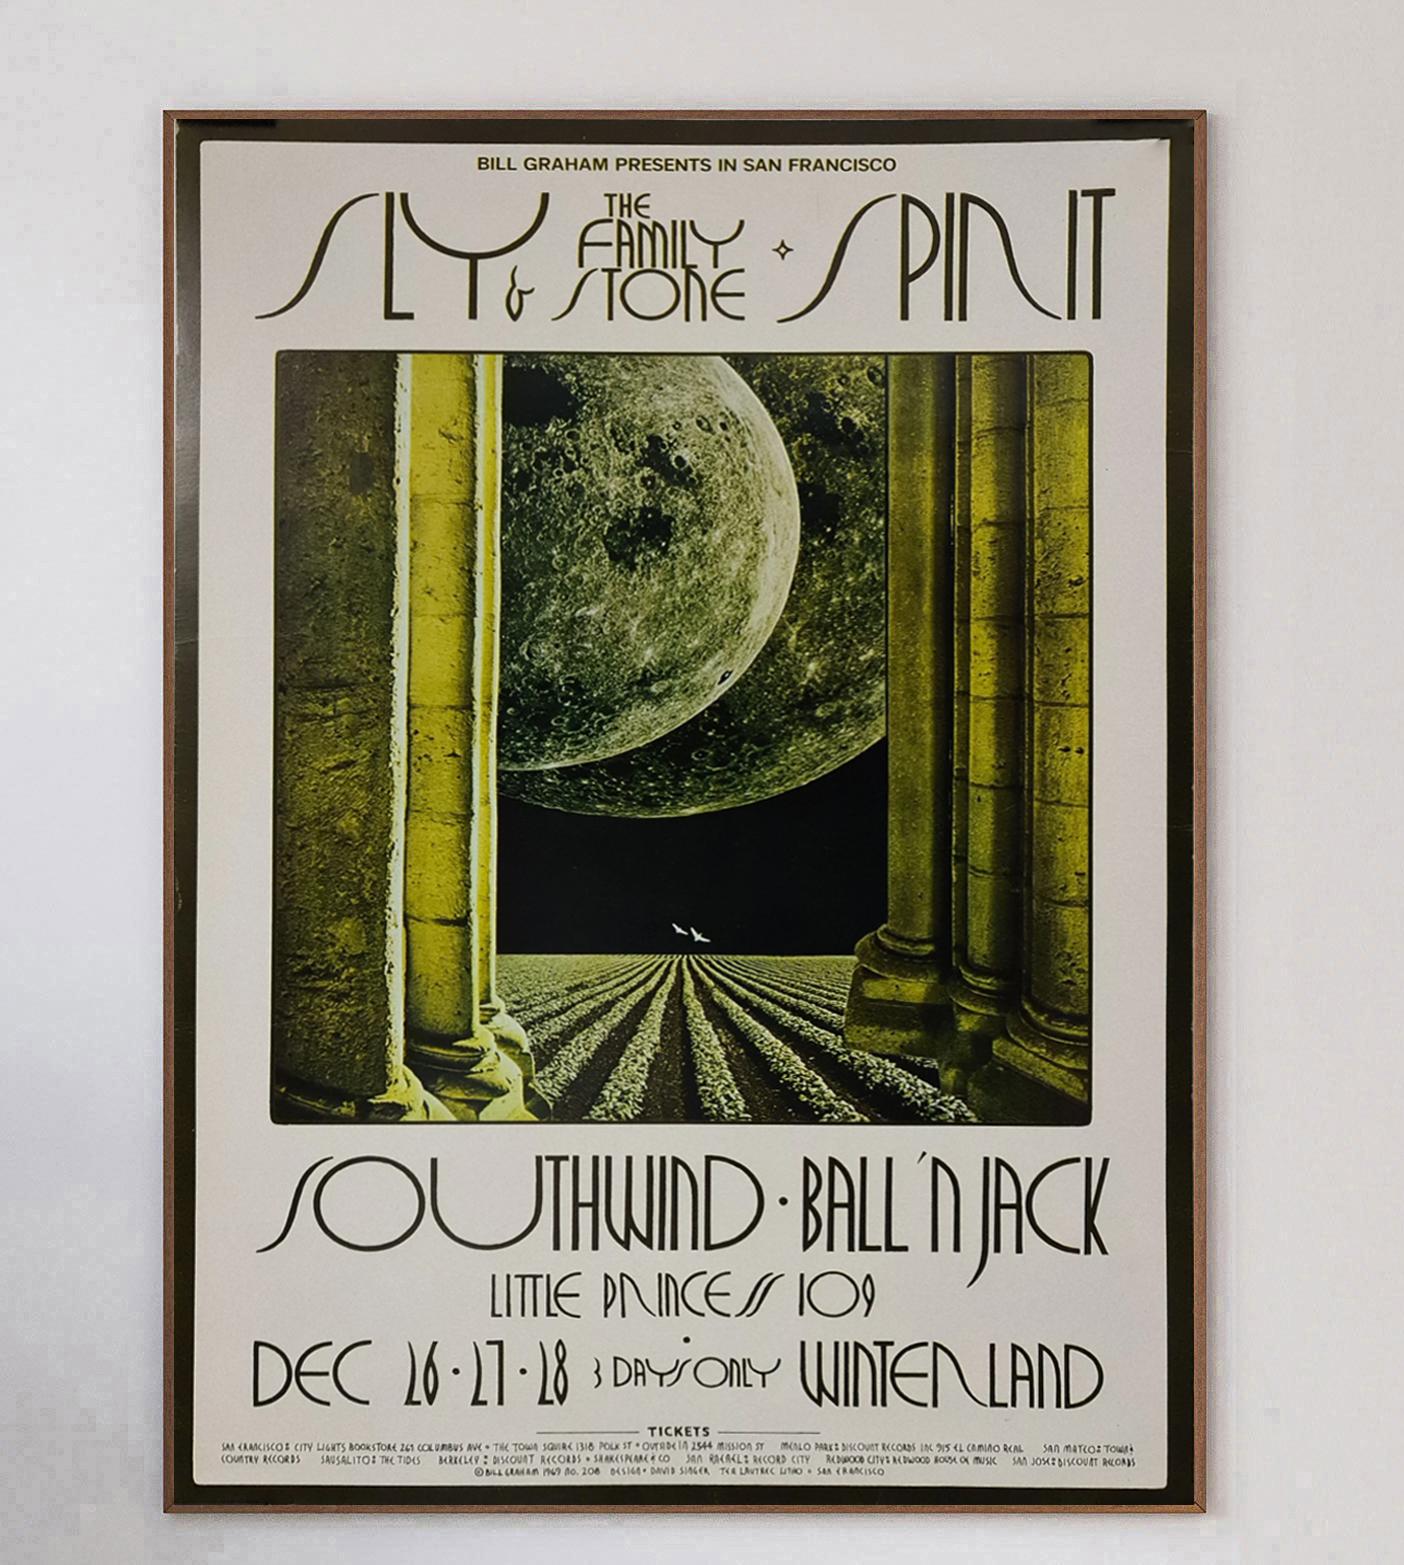 Brilliant poster designed by the iconic poster artist David Singer promoting Sly & the Family Stone's headline show at Winterland in San Francisco, California. The funk rock group played the hometown show at perhaps the height of their fame, coming